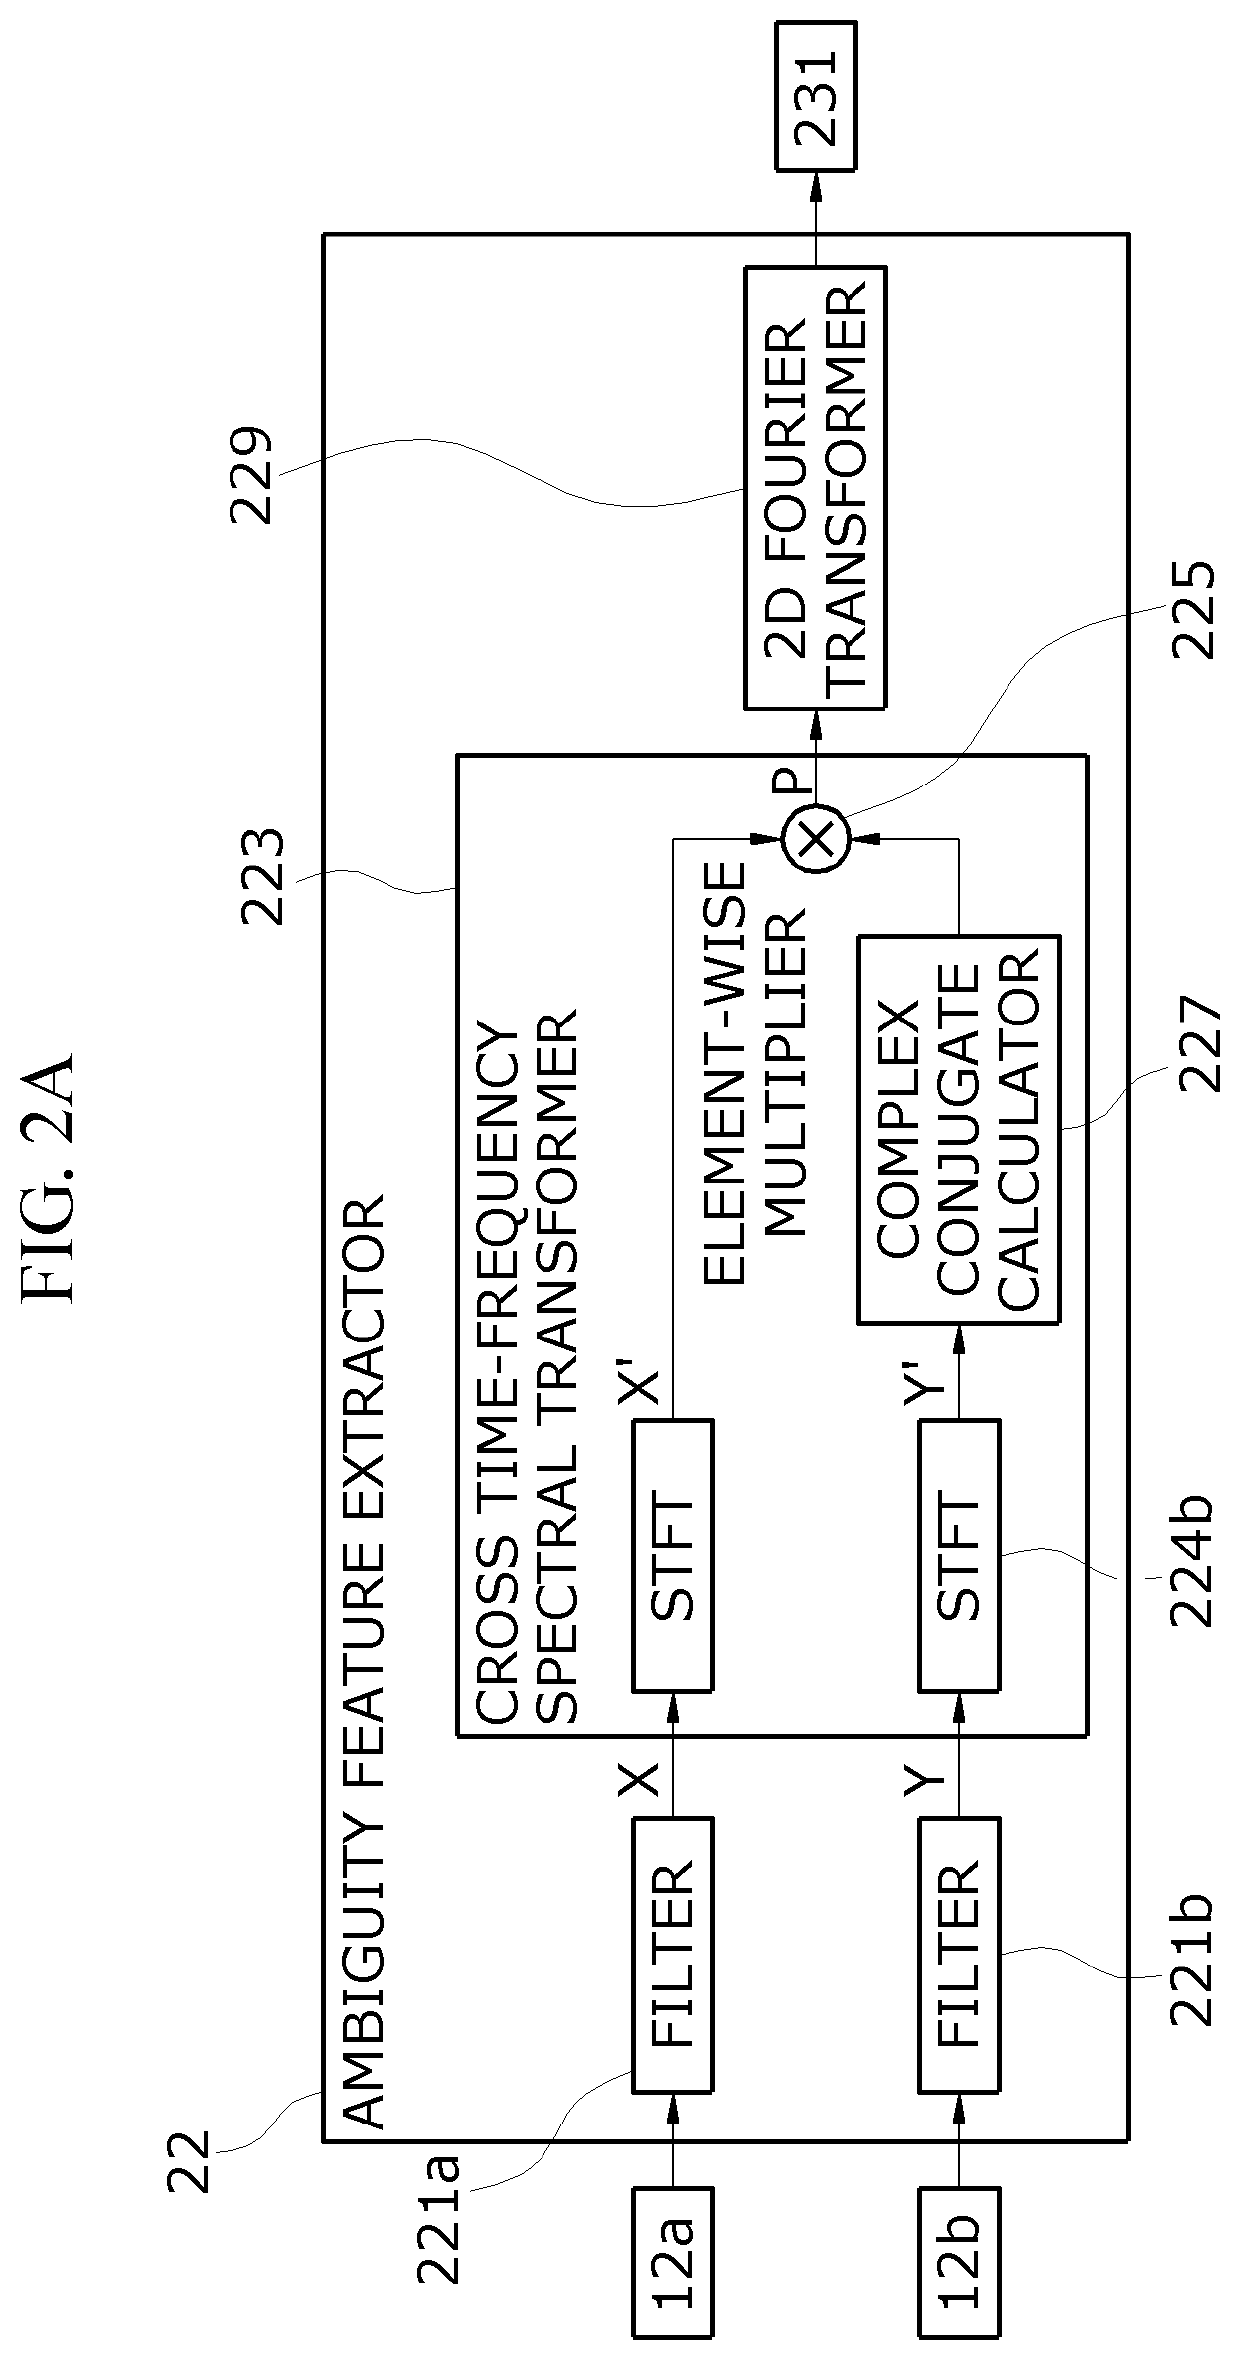 Machine learning apparatus and method based on multi-feature extraction and transfer learning, and leak detection apparatus using the same